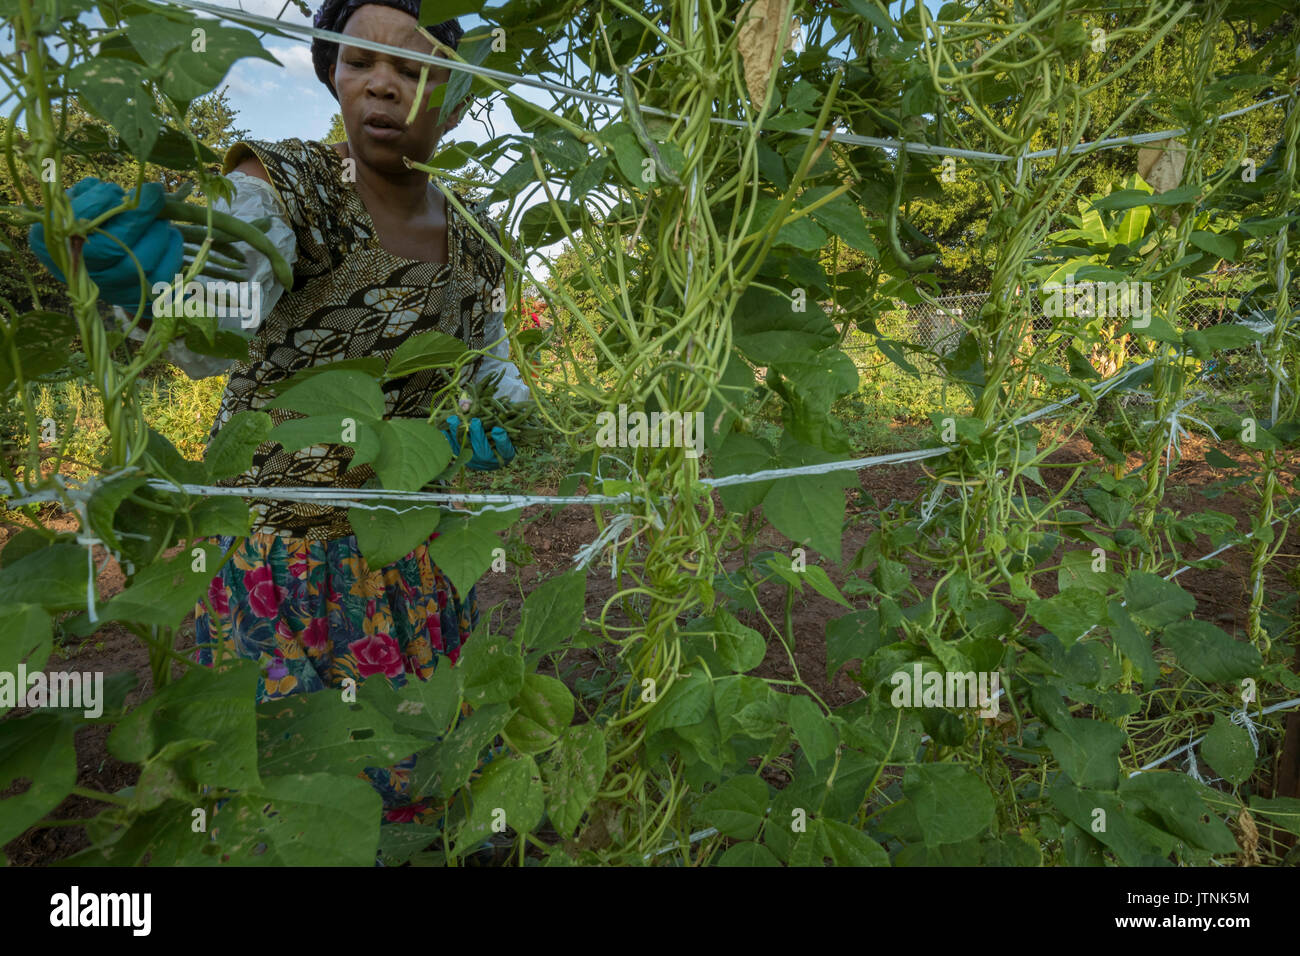 Maria Miburo harvesting beans on plot of land in Decatur, GA. They are refugees from Burundi and sell their produce through Global Growers. Stock Photo